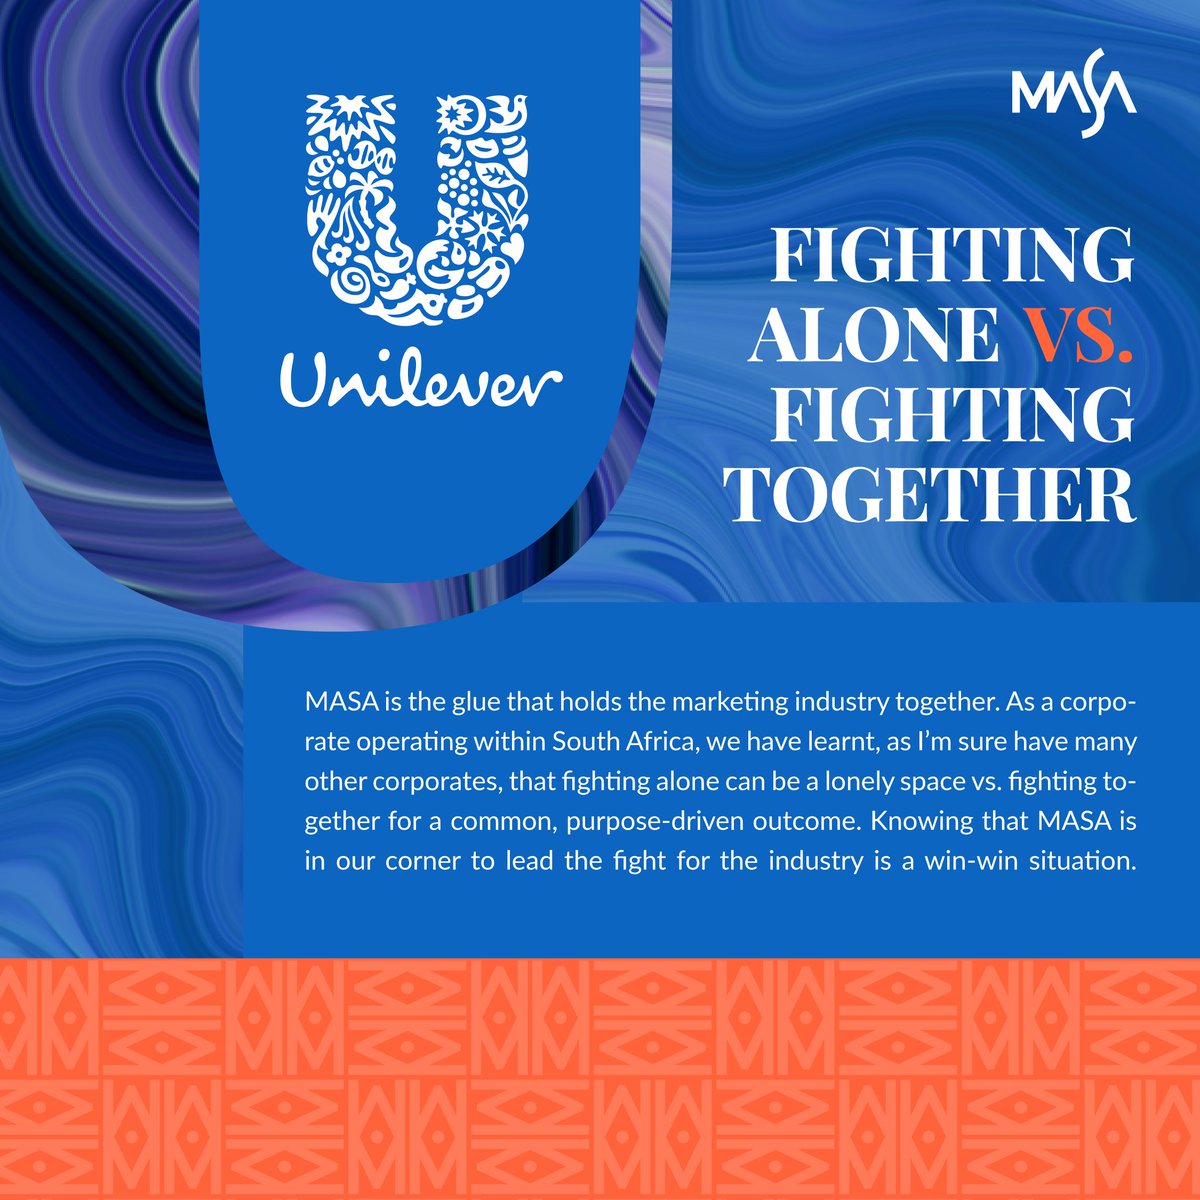 #MASA is the glue that holds the marketing industry together. As a corporate operating within South Africa, @UnileverSA knows the value of fighting together for a common, purpose-driven outcome. Join the fight, join #MASA today… #Unilever #MarketingIndustry #GetToKnowMASA